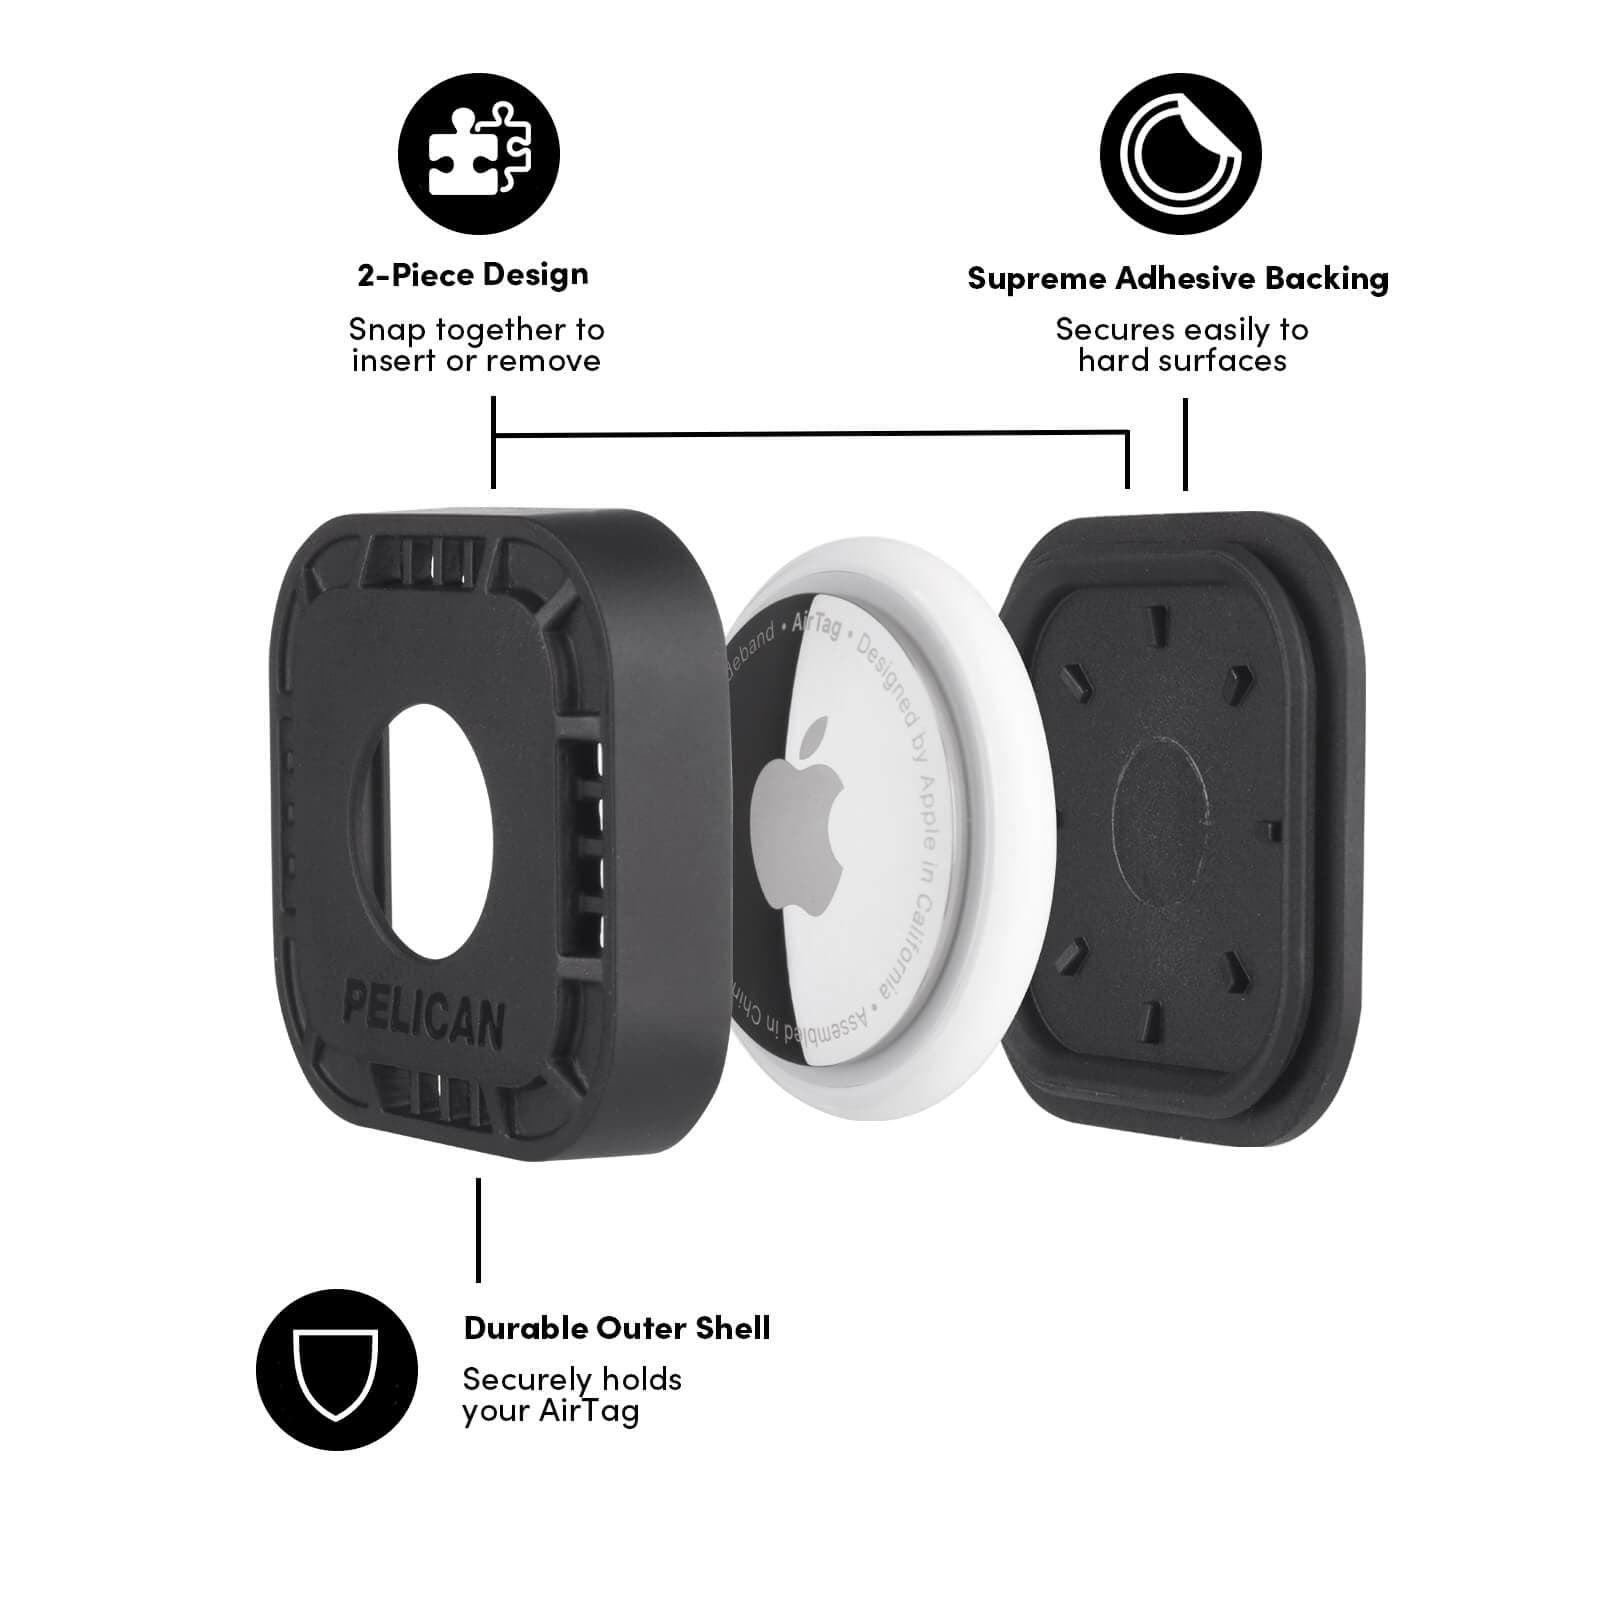 2 PIECE DESIGN. SNAP TOGETHER TO INSERT OR REMOVE. SUPREME ADHESIVE BACKING. SECURES EASILY TO HARD SURFACES. DURABLE OUTER SHELL. SECURELY HOLDS YOUR AIRTAG. COLOR::BLACK